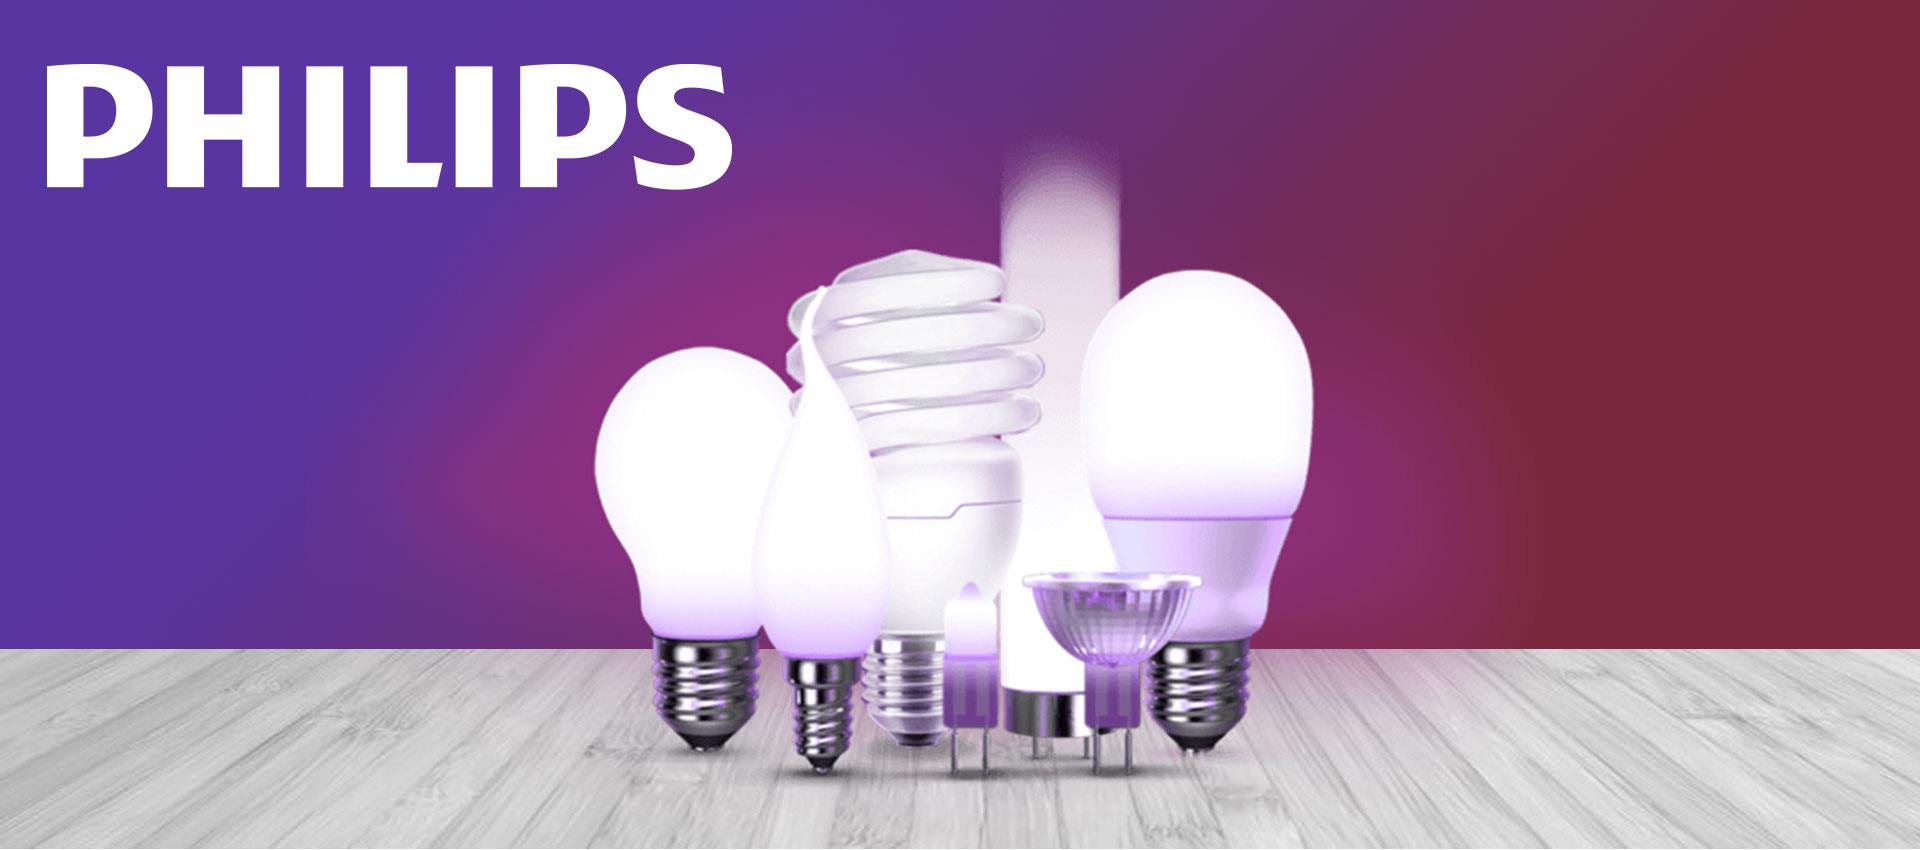 LED Ceiling lights Philips Pakistan - Latest Product review 2020